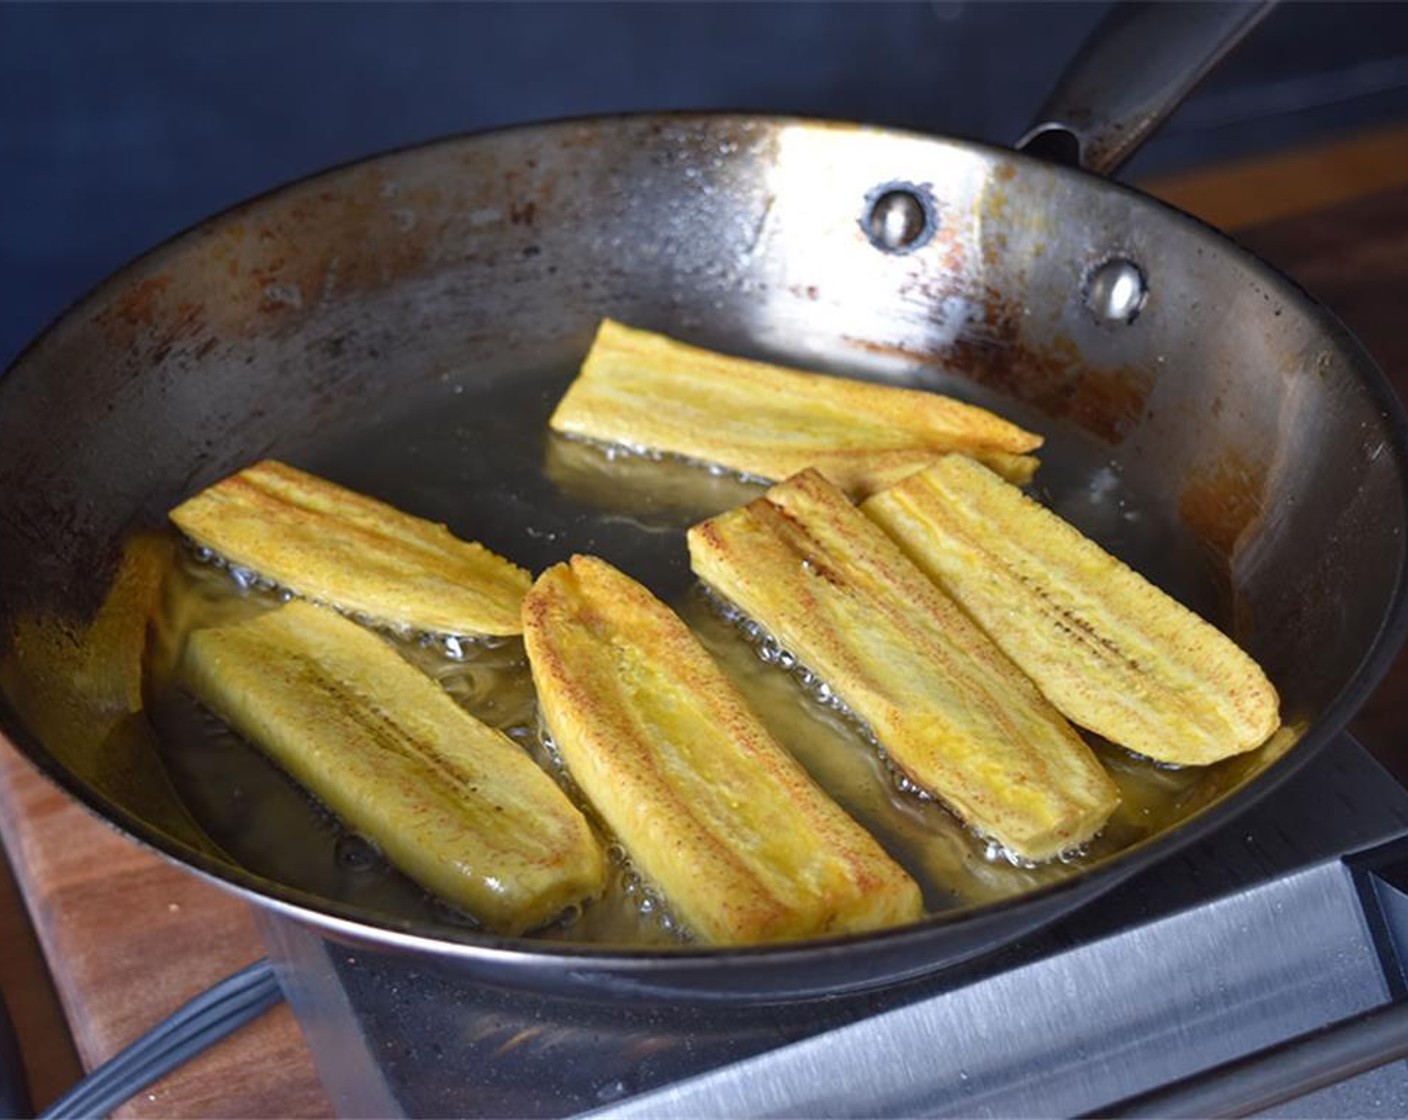 step 8 Heat Vegetable Oil (1/4 cup) in pan under medium heat. Fry the Plantains (4) on each side for 3-5 minutes or until golden brown. Drain on paper towels.